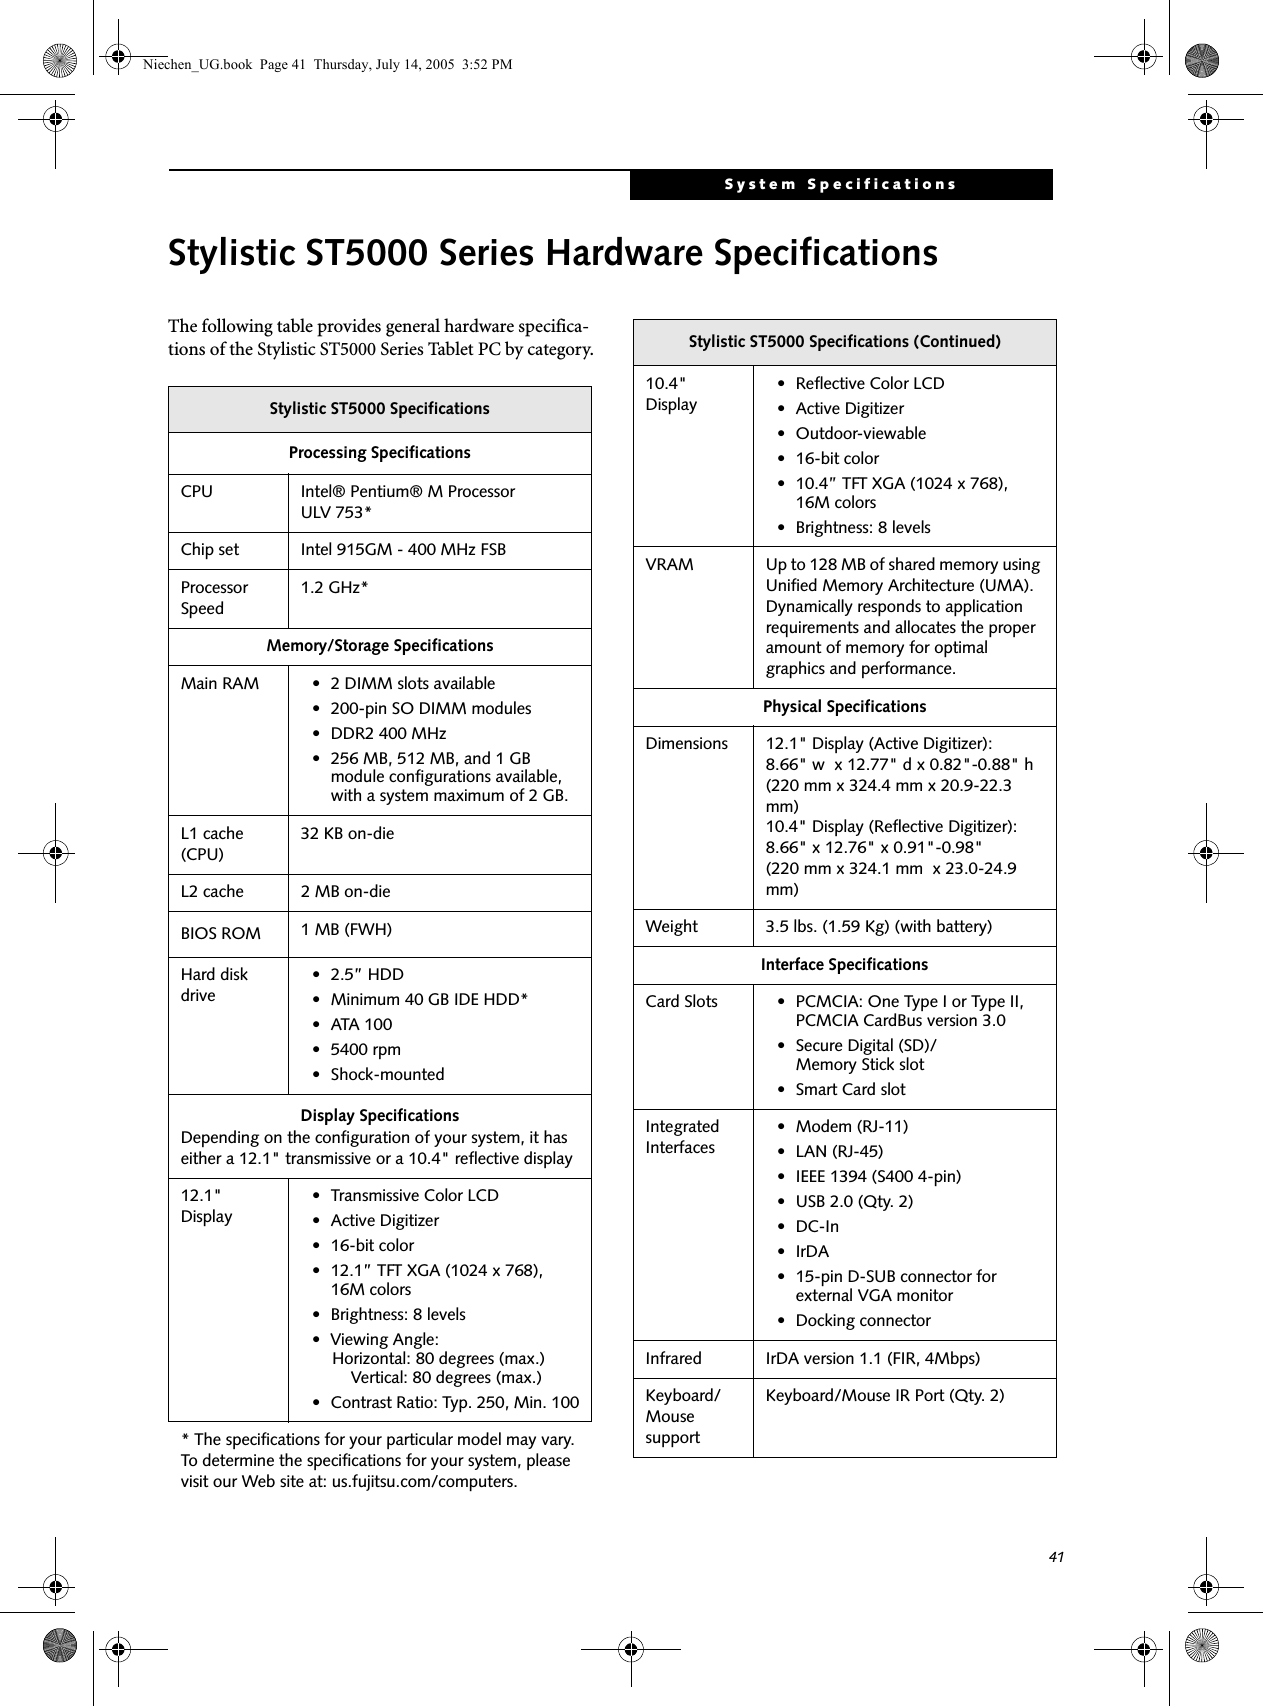 41System SpecificationsStylistic ST5000 Series Hardware SpecificationsThe following table provides general hardware specifica-tions of the Stylistic ST5000 Series Tablet PC by category.Stylistic ST5000 SpecificationsProcessing SpecificationsCPU Intel® Pentium® M Processor ULV 753*Chip set Intel 915GM - 400 MHz FSBProcessor Speed1.2 GHz*Memory/Storage SpecificationsMain RAM • 2 DIMM slots available • 200-pin SO DIMM modules• DDR2 400 MHz• 256 MB, 512 MB, and 1 GB module configurations available, with a system maximum of 2 GB.L1 cache (CPU)32 KB on-die L2 cache 2 MB on-die BIOS ROM 1 MB (FWH)Hard disk drive• 2.5” HDD• Minimum 40 GB IDE HDD*•ATA 100• 5400 rpm• Shock-mountedDisplay SpecificationsDepending on the configuration of your system, it has either a 12.1&quot; transmissive or a 10.4&quot; reflective display12.1&quot; Display• Transmissive Color LCD• Active Digitizer• 16-bit color• 12.1” TFT XGA (1024 x 768), 16M colors• Brightness: 8 levels• Viewing Angle:    Horizontal: 80 degrees (max.)     Vertical: 80 degrees (max.)• Contrast Ratio: Typ. 250, Min. 100* The specifications for your particular model may vary. To determine the specifications for your system, please visit our Web site at: us.fujitsu.com/computers.10.4&quot; Display• Reflective Color LCD• Active Digitizer• Outdoor-viewable• 16-bit color• 10.4” TFT XGA (1024 x 768), 16M colors• Brightness: 8 levelsVRAM Up to 128 MB of shared memory using Unified Memory Architecture (UMA). Dynamically responds to application requirements and allocates the proper amount of memory for optimal graphics and performance. Physical SpecificationsDimensions 12.1&quot; Display (Active Digitizer):8.66&quot; w  x 12.77&quot; d x 0.82&quot;-0.88&quot; h (220 mm x 324.4 mm x 20.9-22.3 mm)10.4&quot; Display (Reflective Digitizer):8.66&quot; x 12.76&quot; x 0.91&quot;-0.98&quot;(220 mm x 324.1 mm  x 23.0-24.9 mm)Weight 3.5 lbs. (1.59 Kg) (with battery)Interface SpecificationsCard Slots • PCMCIA: One Type I or Type II, PCMCIA CardBus version 3.0• Secure Digital (SD)/Memory Stick slot•Smart Card slotIntegrated Interfaces• Modem (RJ-11)• LAN (RJ-45)• IEEE 1394 (S400 4-pin)• USB 2.0 (Qty. 2)•DC-In•IrDA• 15-pin D-SUB connector for external VGA monitor• Docking connectorInfrared IrDA version 1.1 (FIR, 4Mbps)Keyboard/Mouse supportKeyboard/Mouse IR Port (Qty. 2)Stylistic ST5000 Specifications (Continued)Niechen_UG.book  Page 41  Thursday, July 14, 2005  3:52 PM